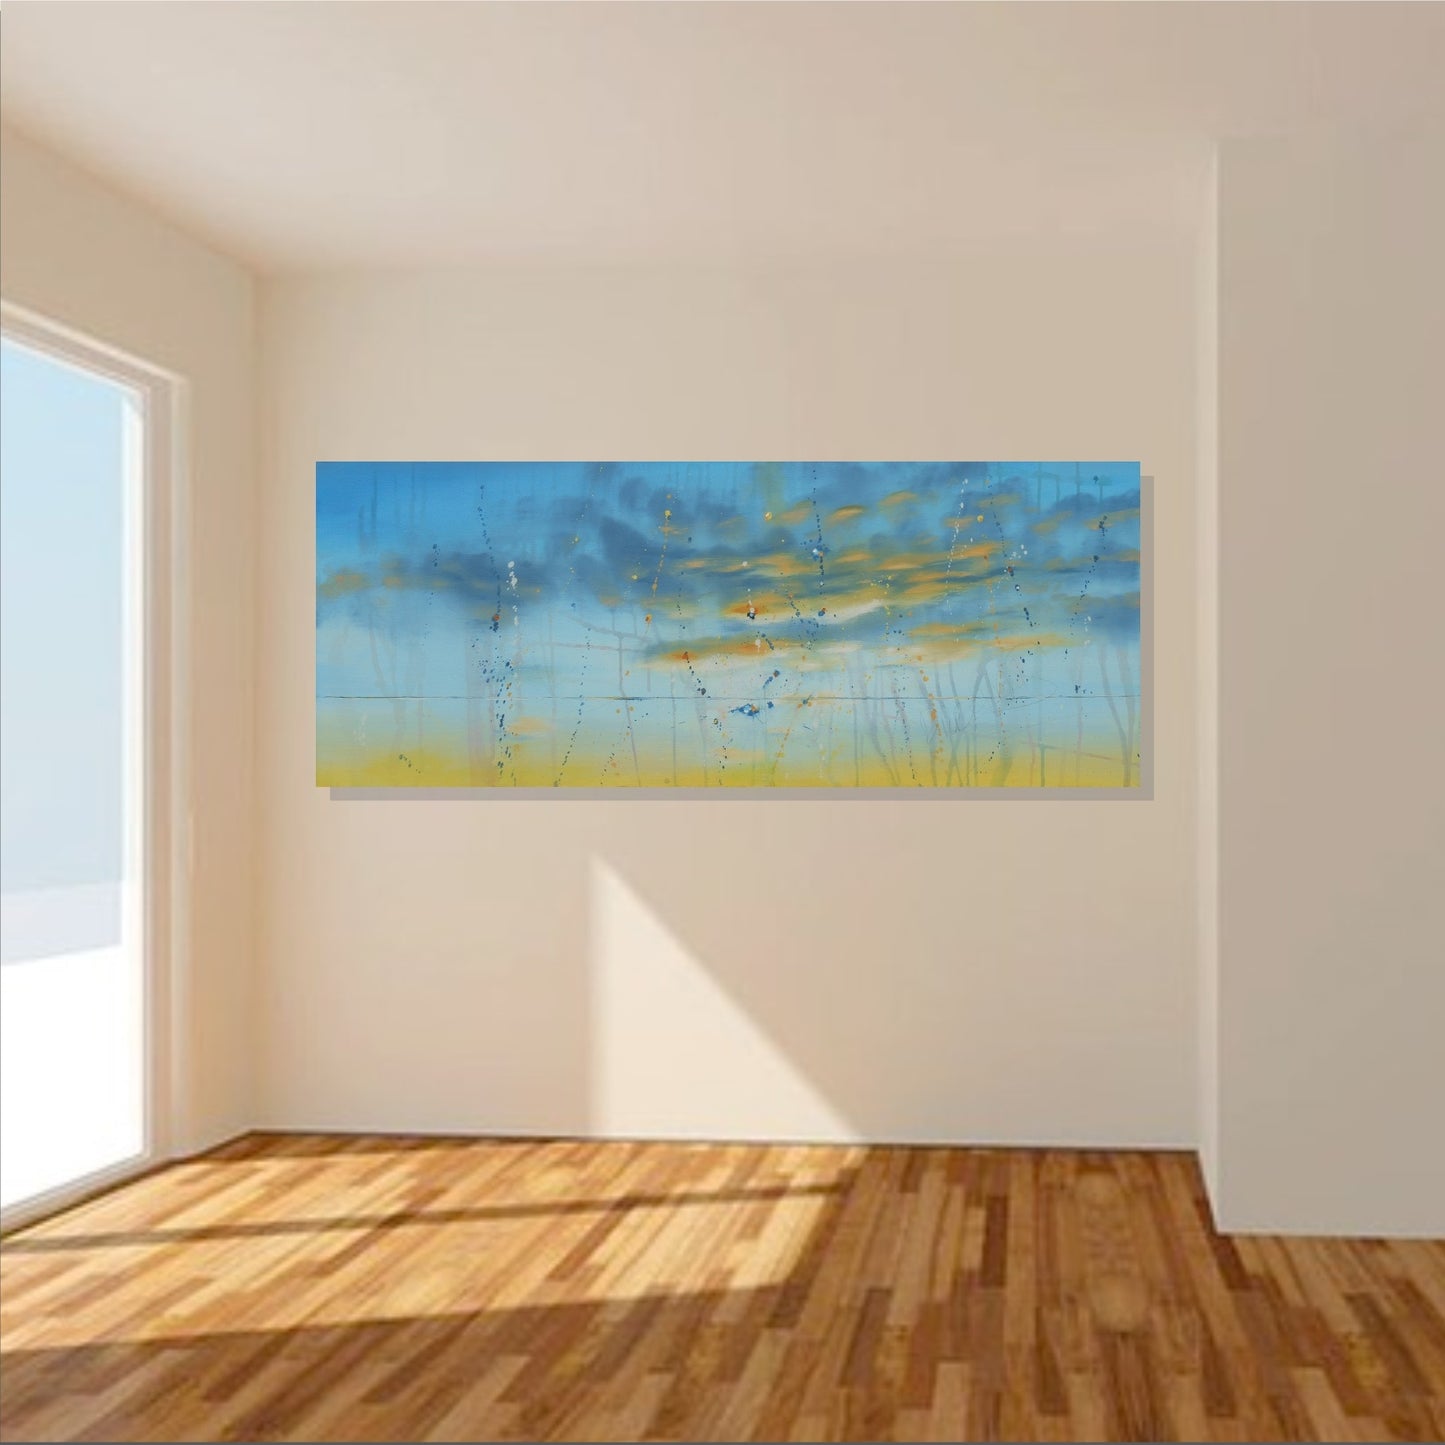 Return to Your Dreams 16″ x 40″ Abstract Painting